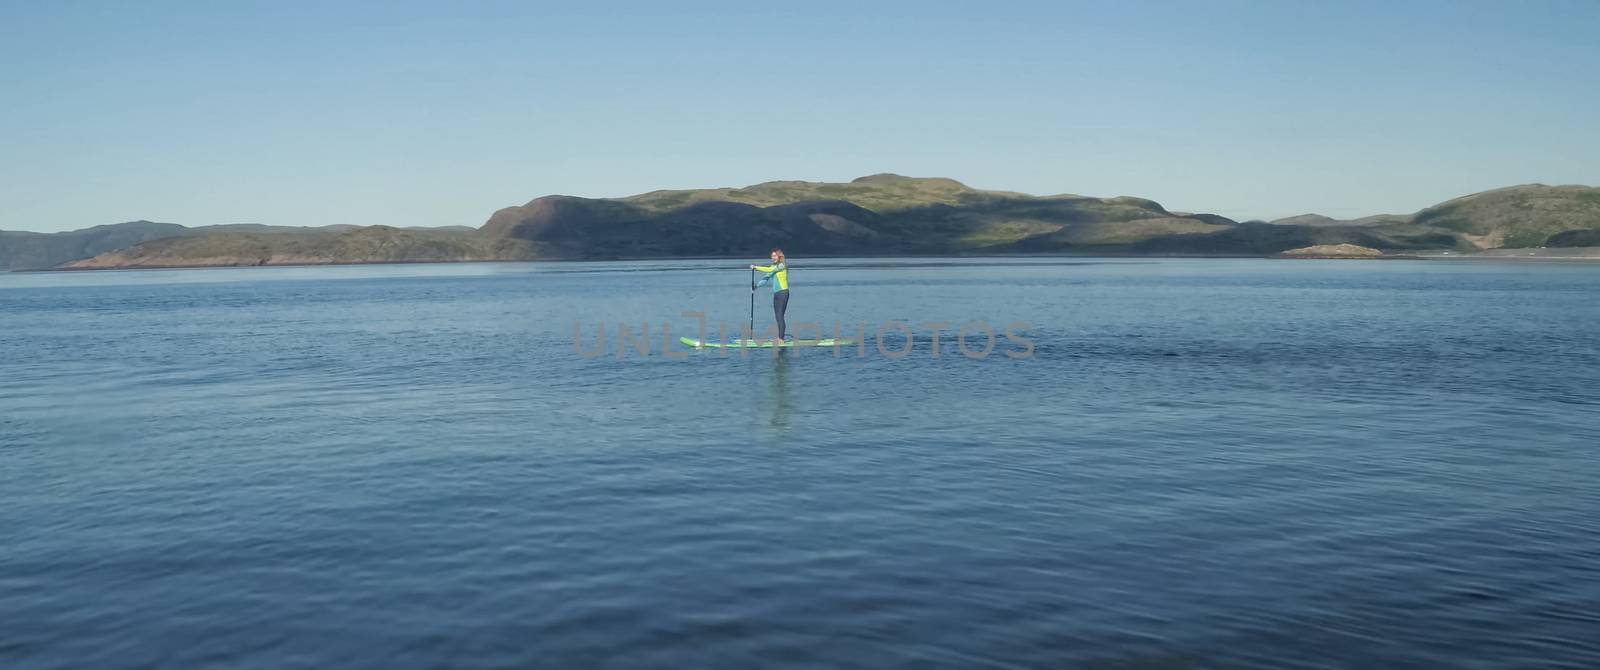 girl on a boots board is rowing a paddle. Sap surfing. by DePo